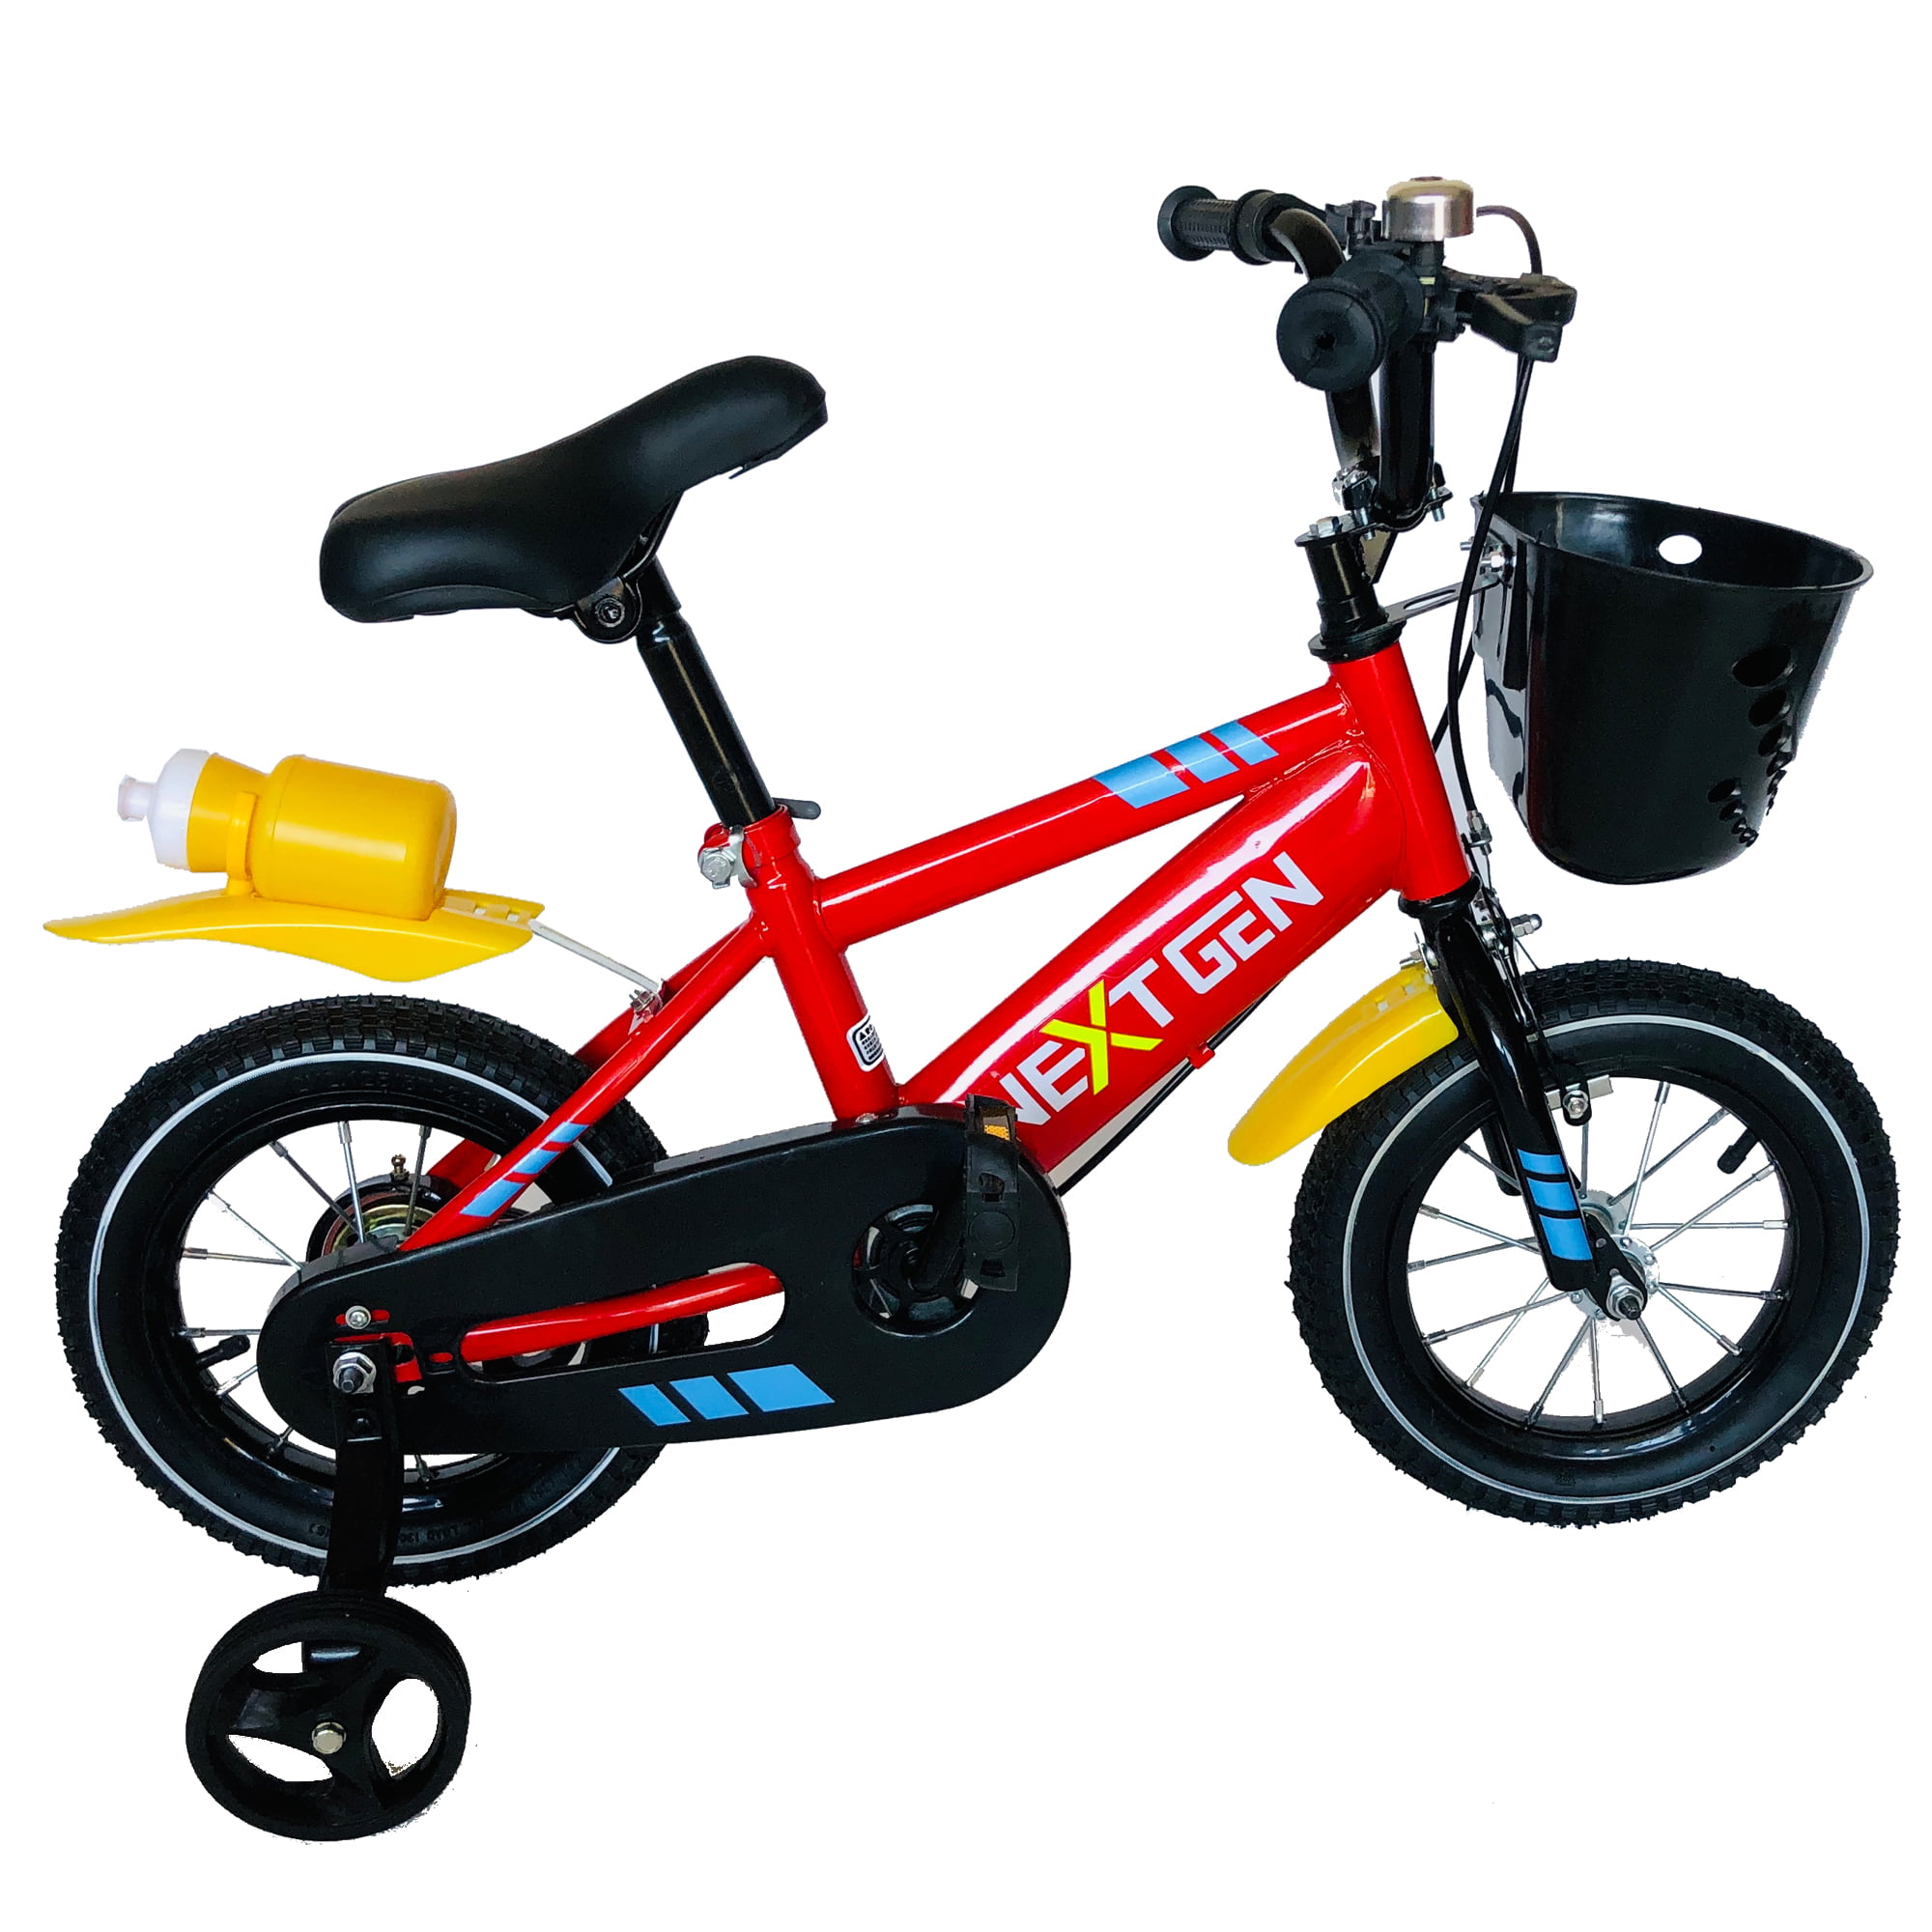 Adjustable Handlebar Details about   Kids Boys 16 Inch Moto X Bike With Stabilizers,16'' Wheels 